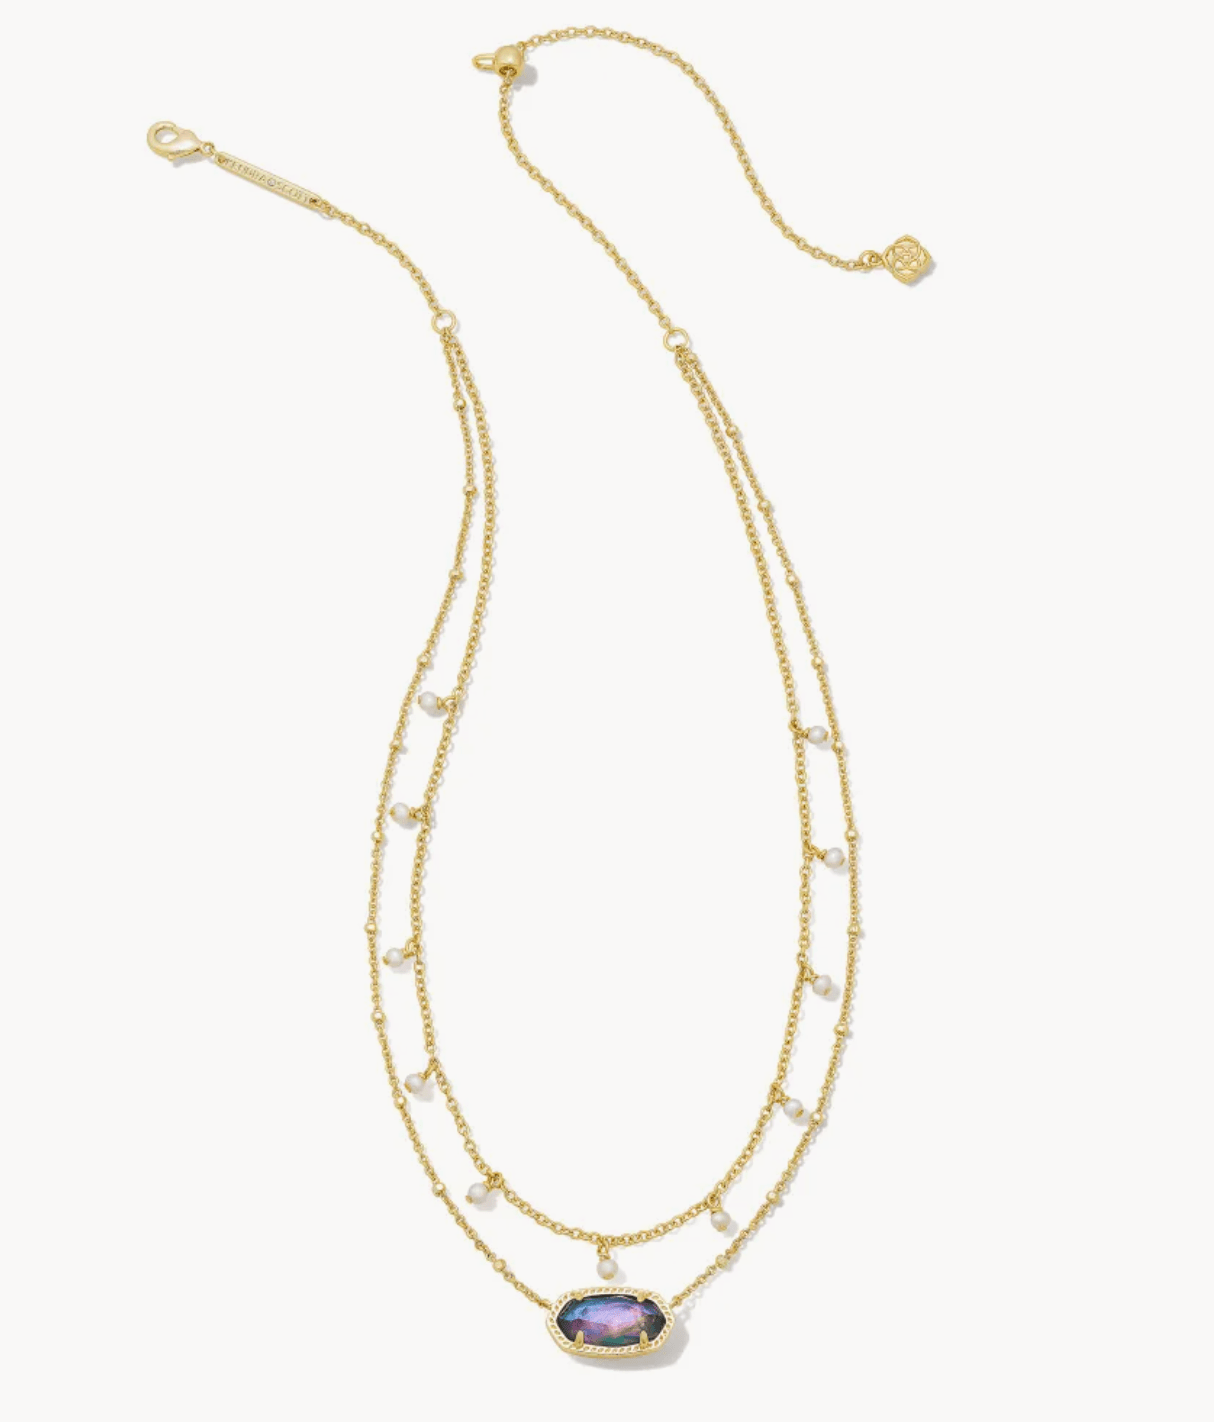 Kendra Scott - Elisa Gold Pearl Multi Strand Necklace in Lilac Abalone |  Findlay Rowe Designs